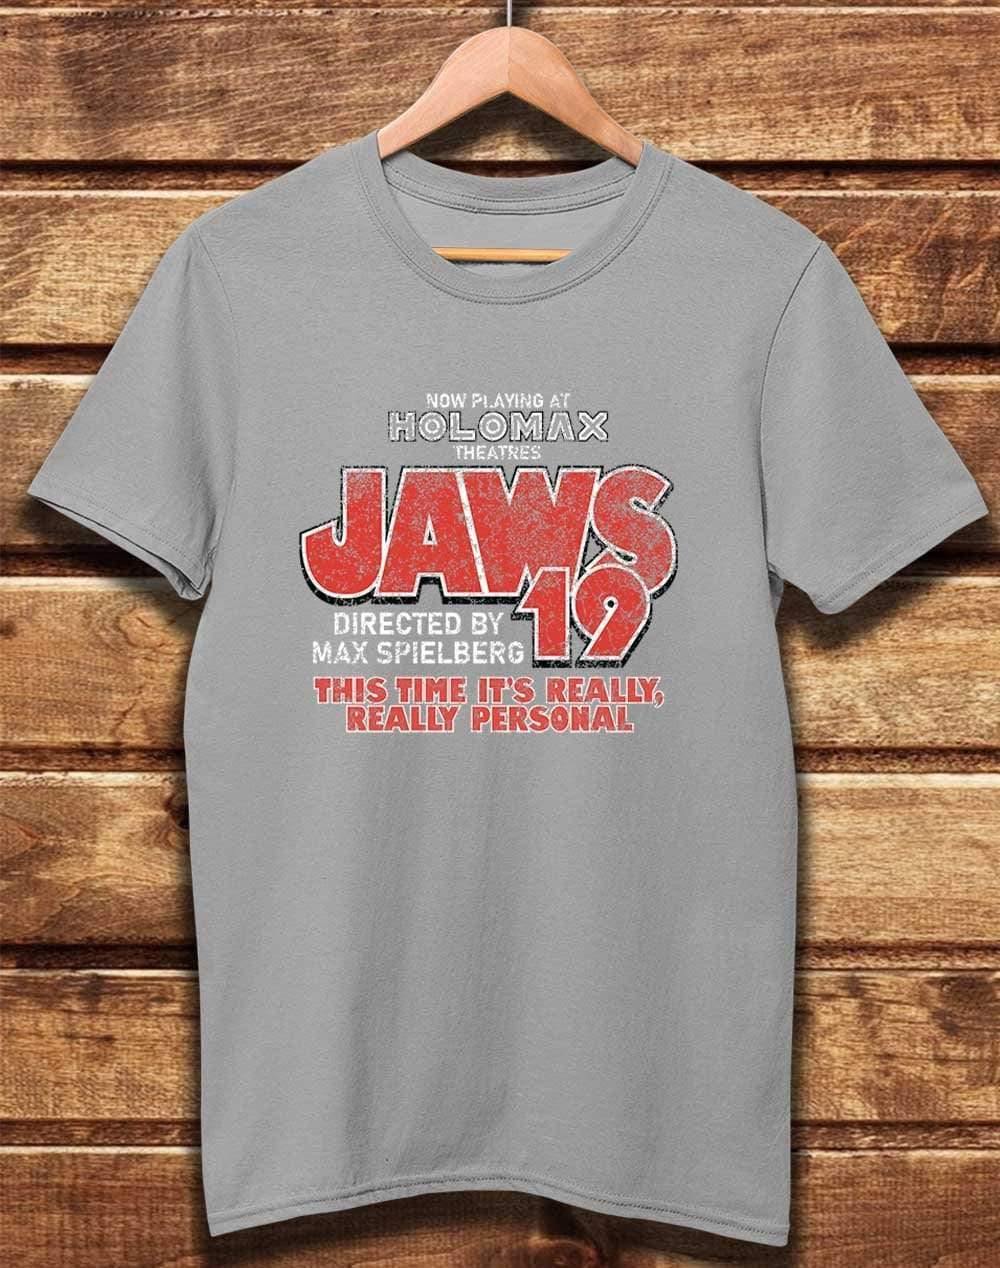 DELUXE Jaws 19 Organic Cotton T-Shirt XS / Light Grey  - Off World Tees